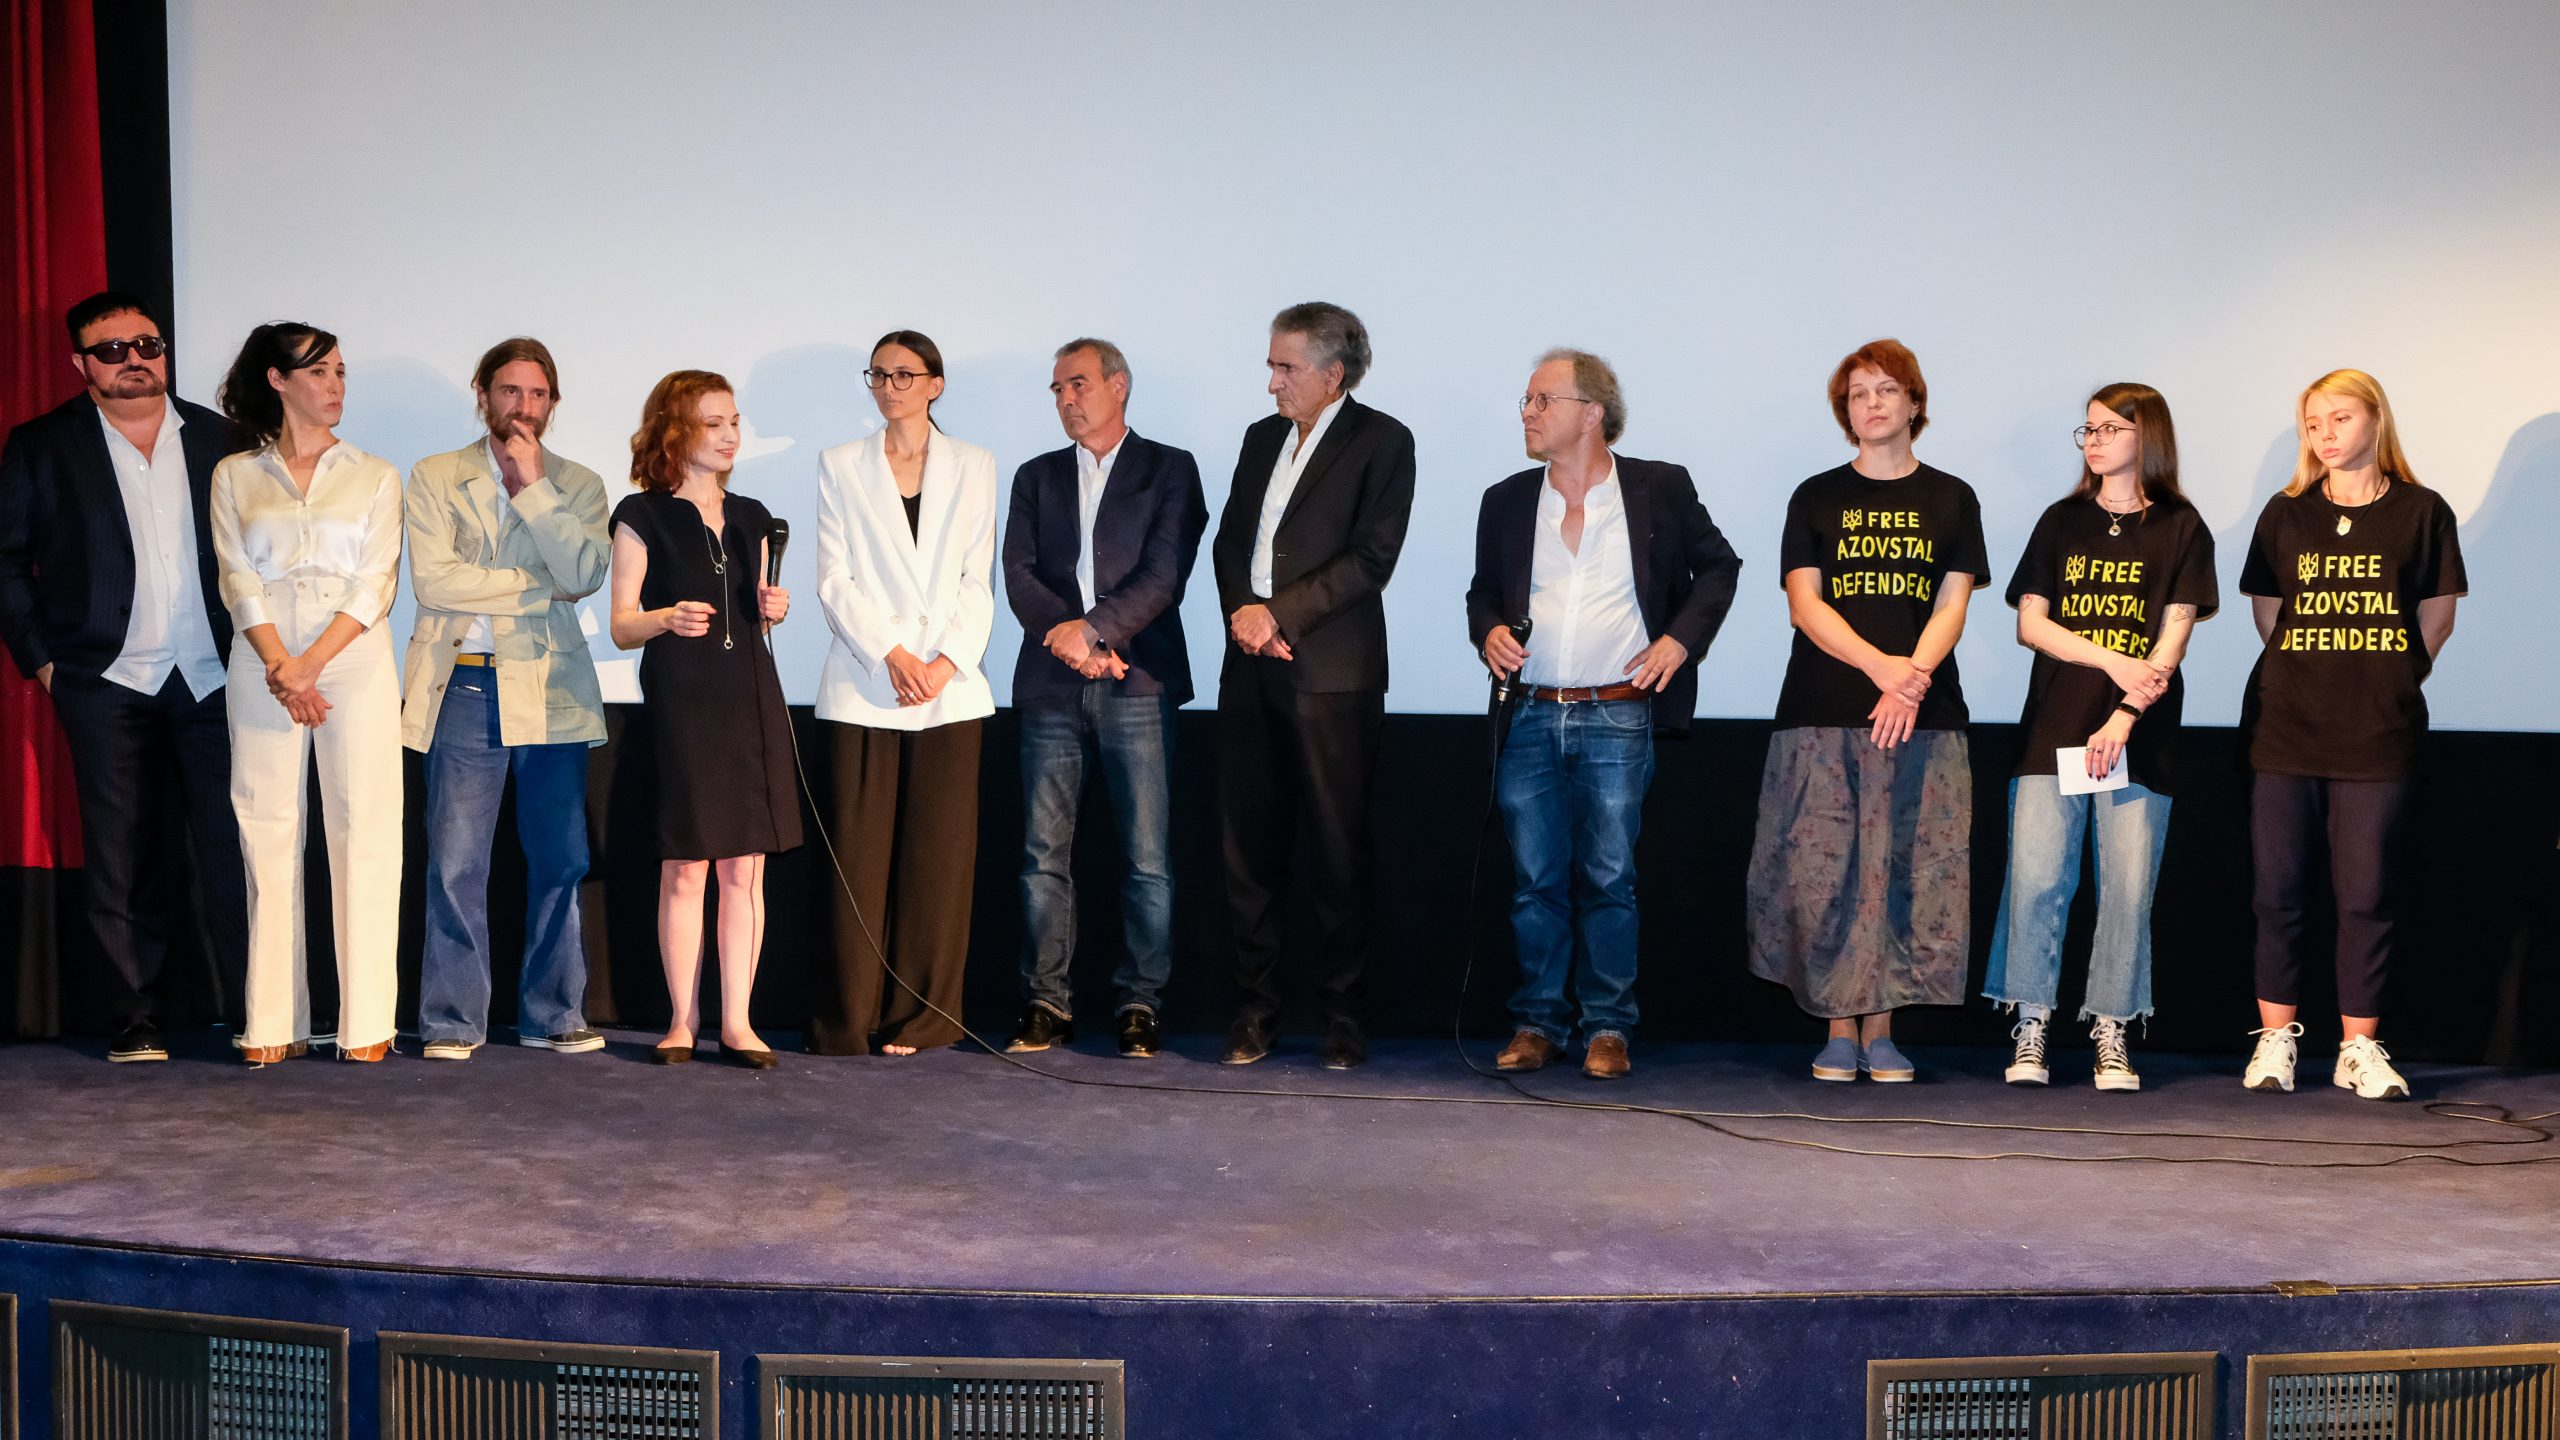 Presentation of the film "Why Ukraine" by Bernard-Henri Lévy and his crew at the Cinema Le Balzac in Paris, June 22, 2022.